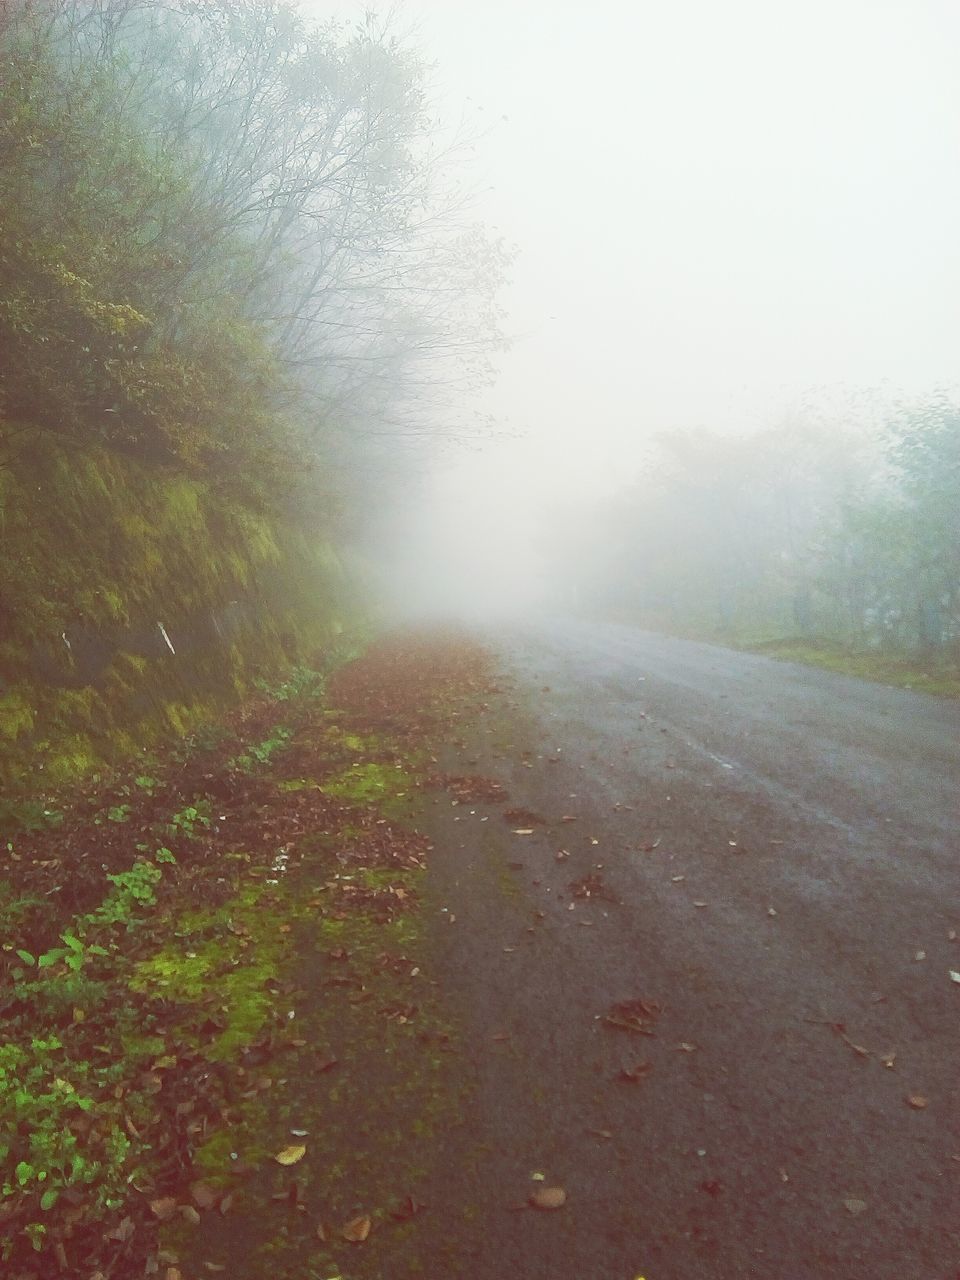 fog, nature, landscape, mist, scenics, tranquility, foggy, the way forward, tranquil scene, weather, tree, day, hazy, beauty in nature, no people, outdoors, road, grass, sky